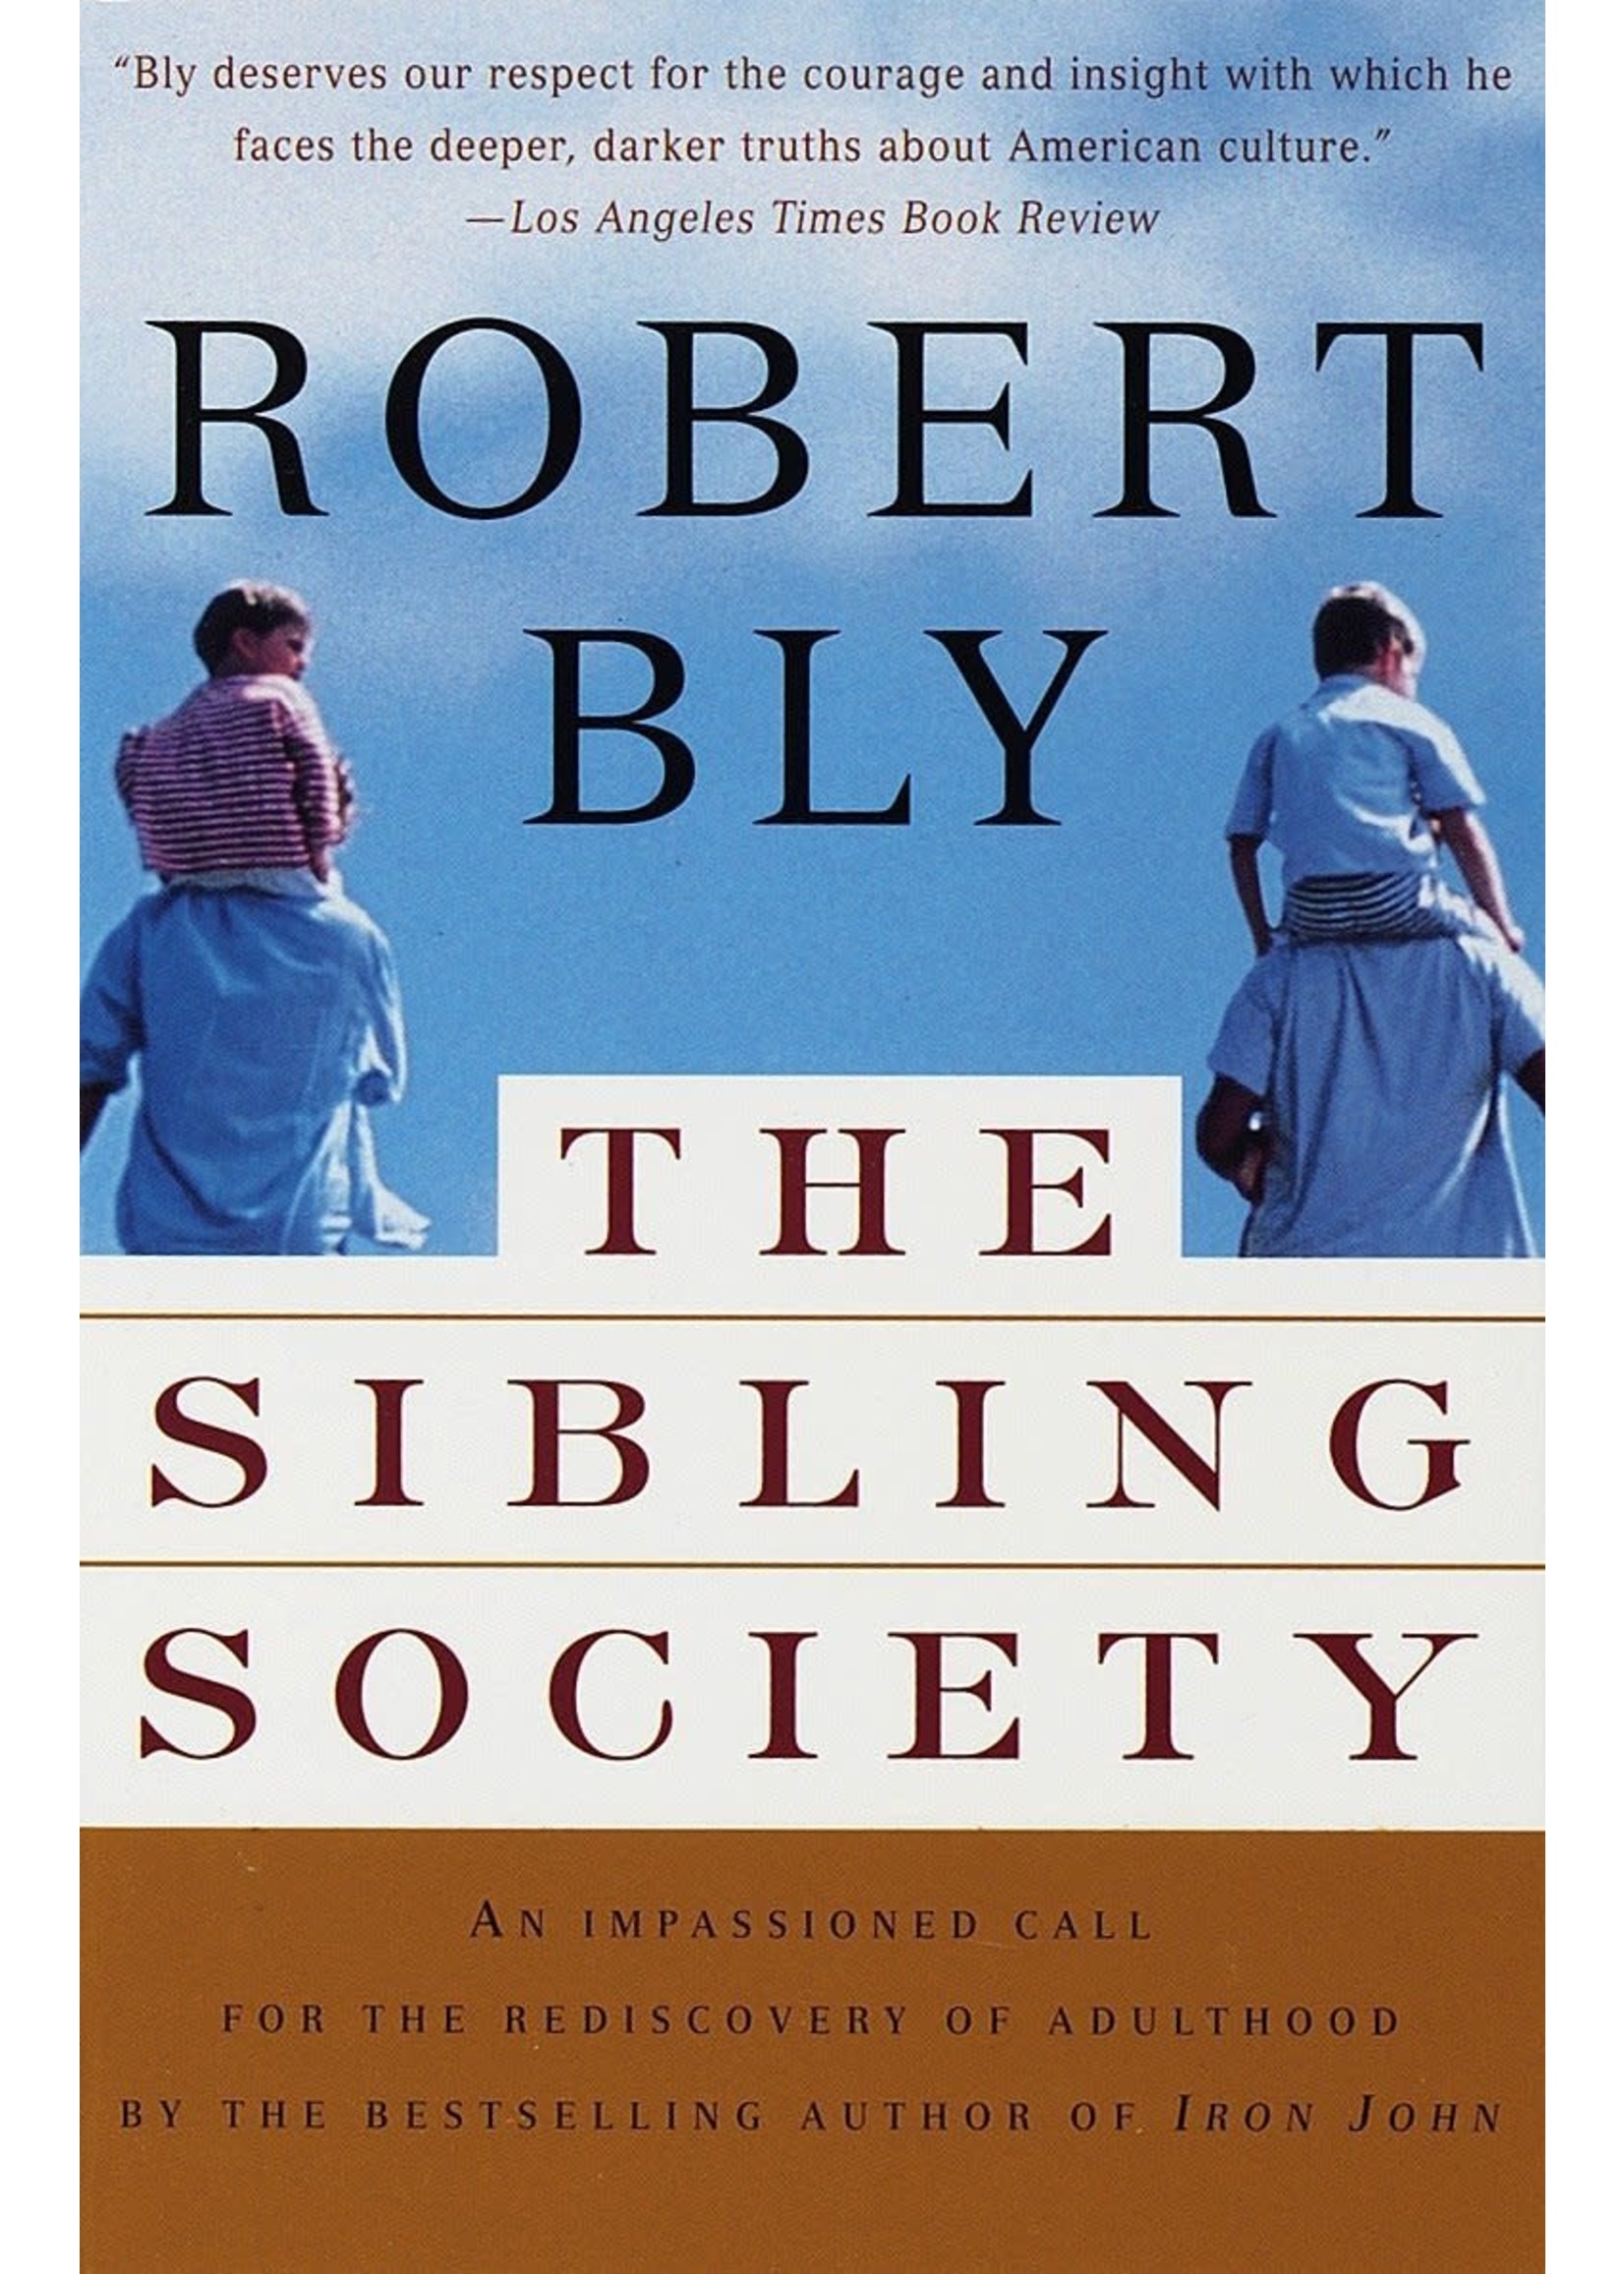 The Sibling Society by Robert Bly